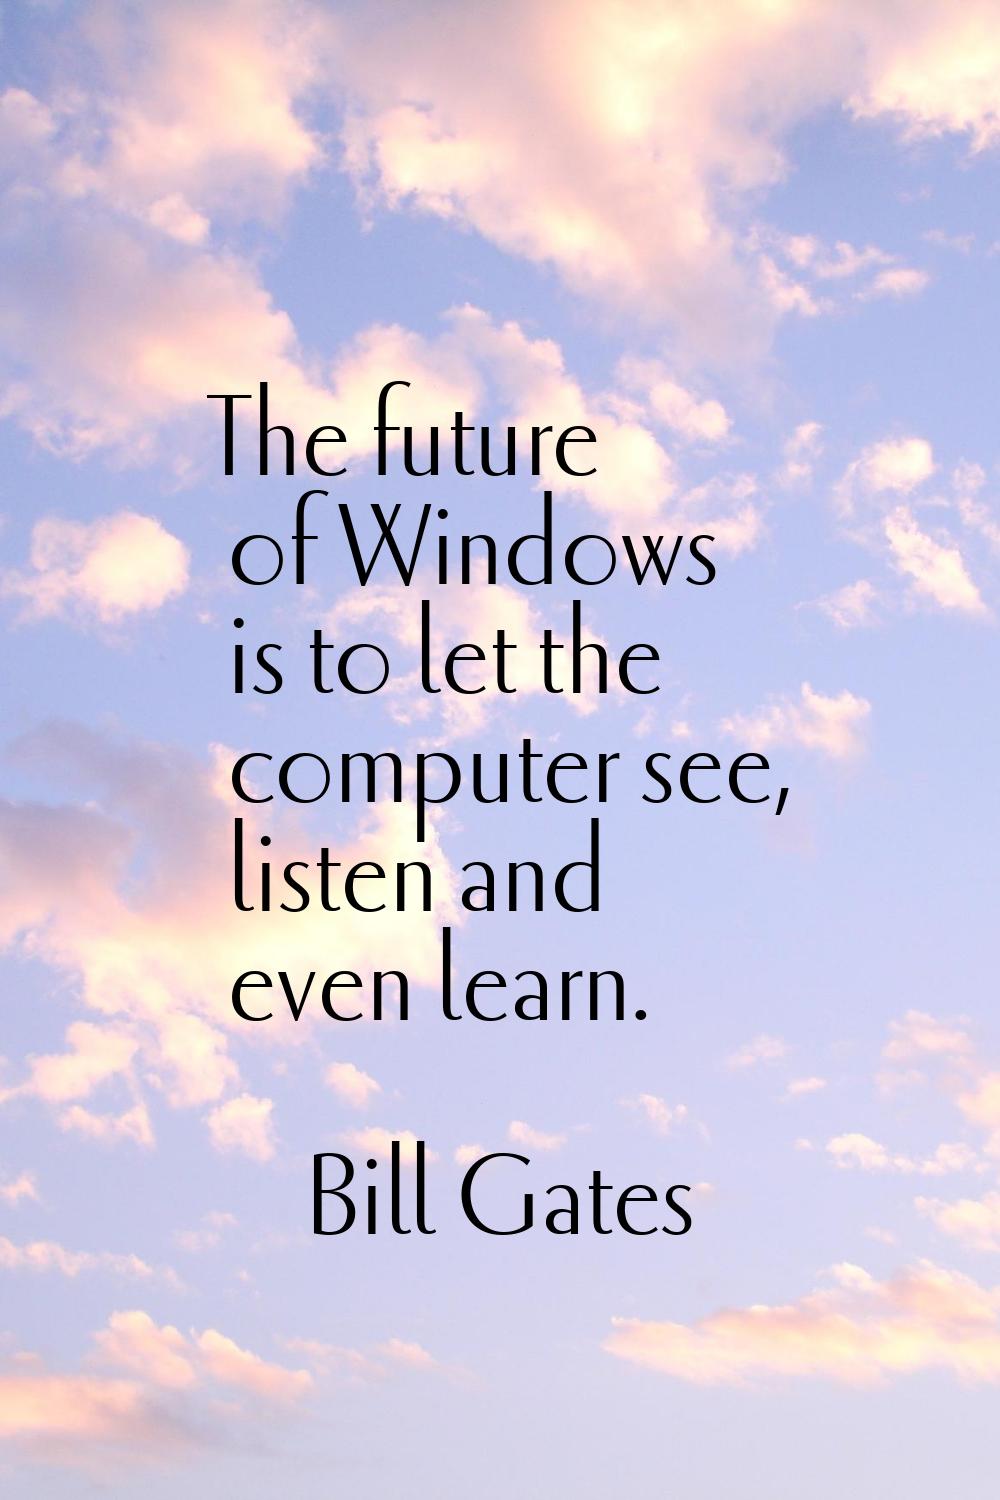 The future of Windows is to let the computer see, listen and even learn.